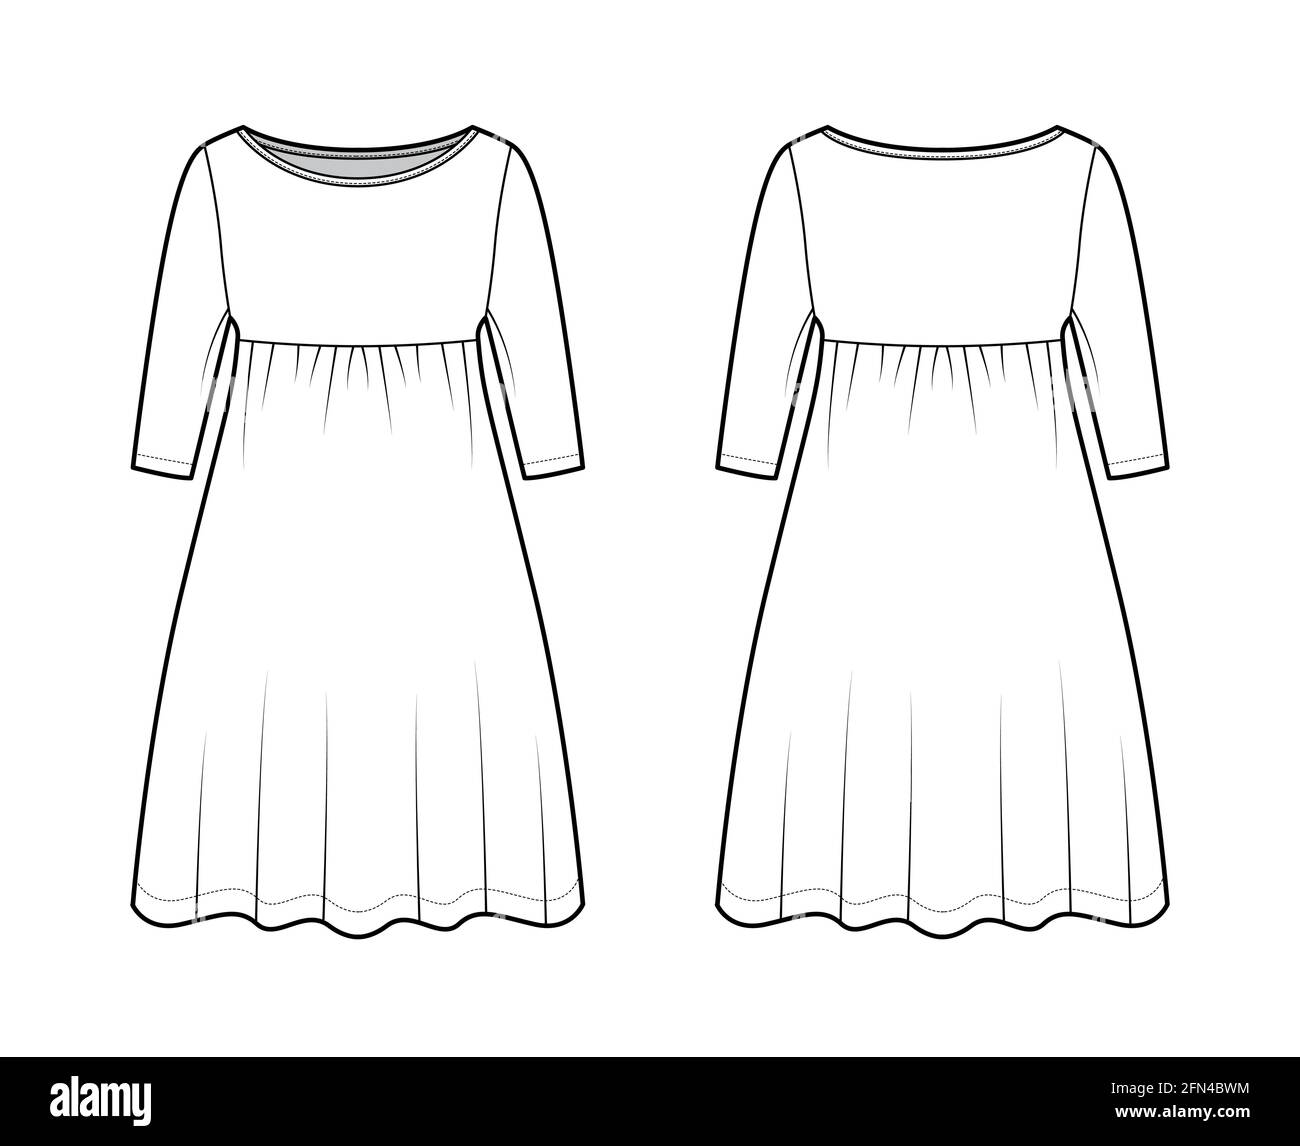 Dress babydoll technical fashion illustration with elbow sleeves, oversized body, knee length A-line skirt, boat neck. Flat apparel front, back, white color style. Women, men unisex CAD mockup Stock Vector